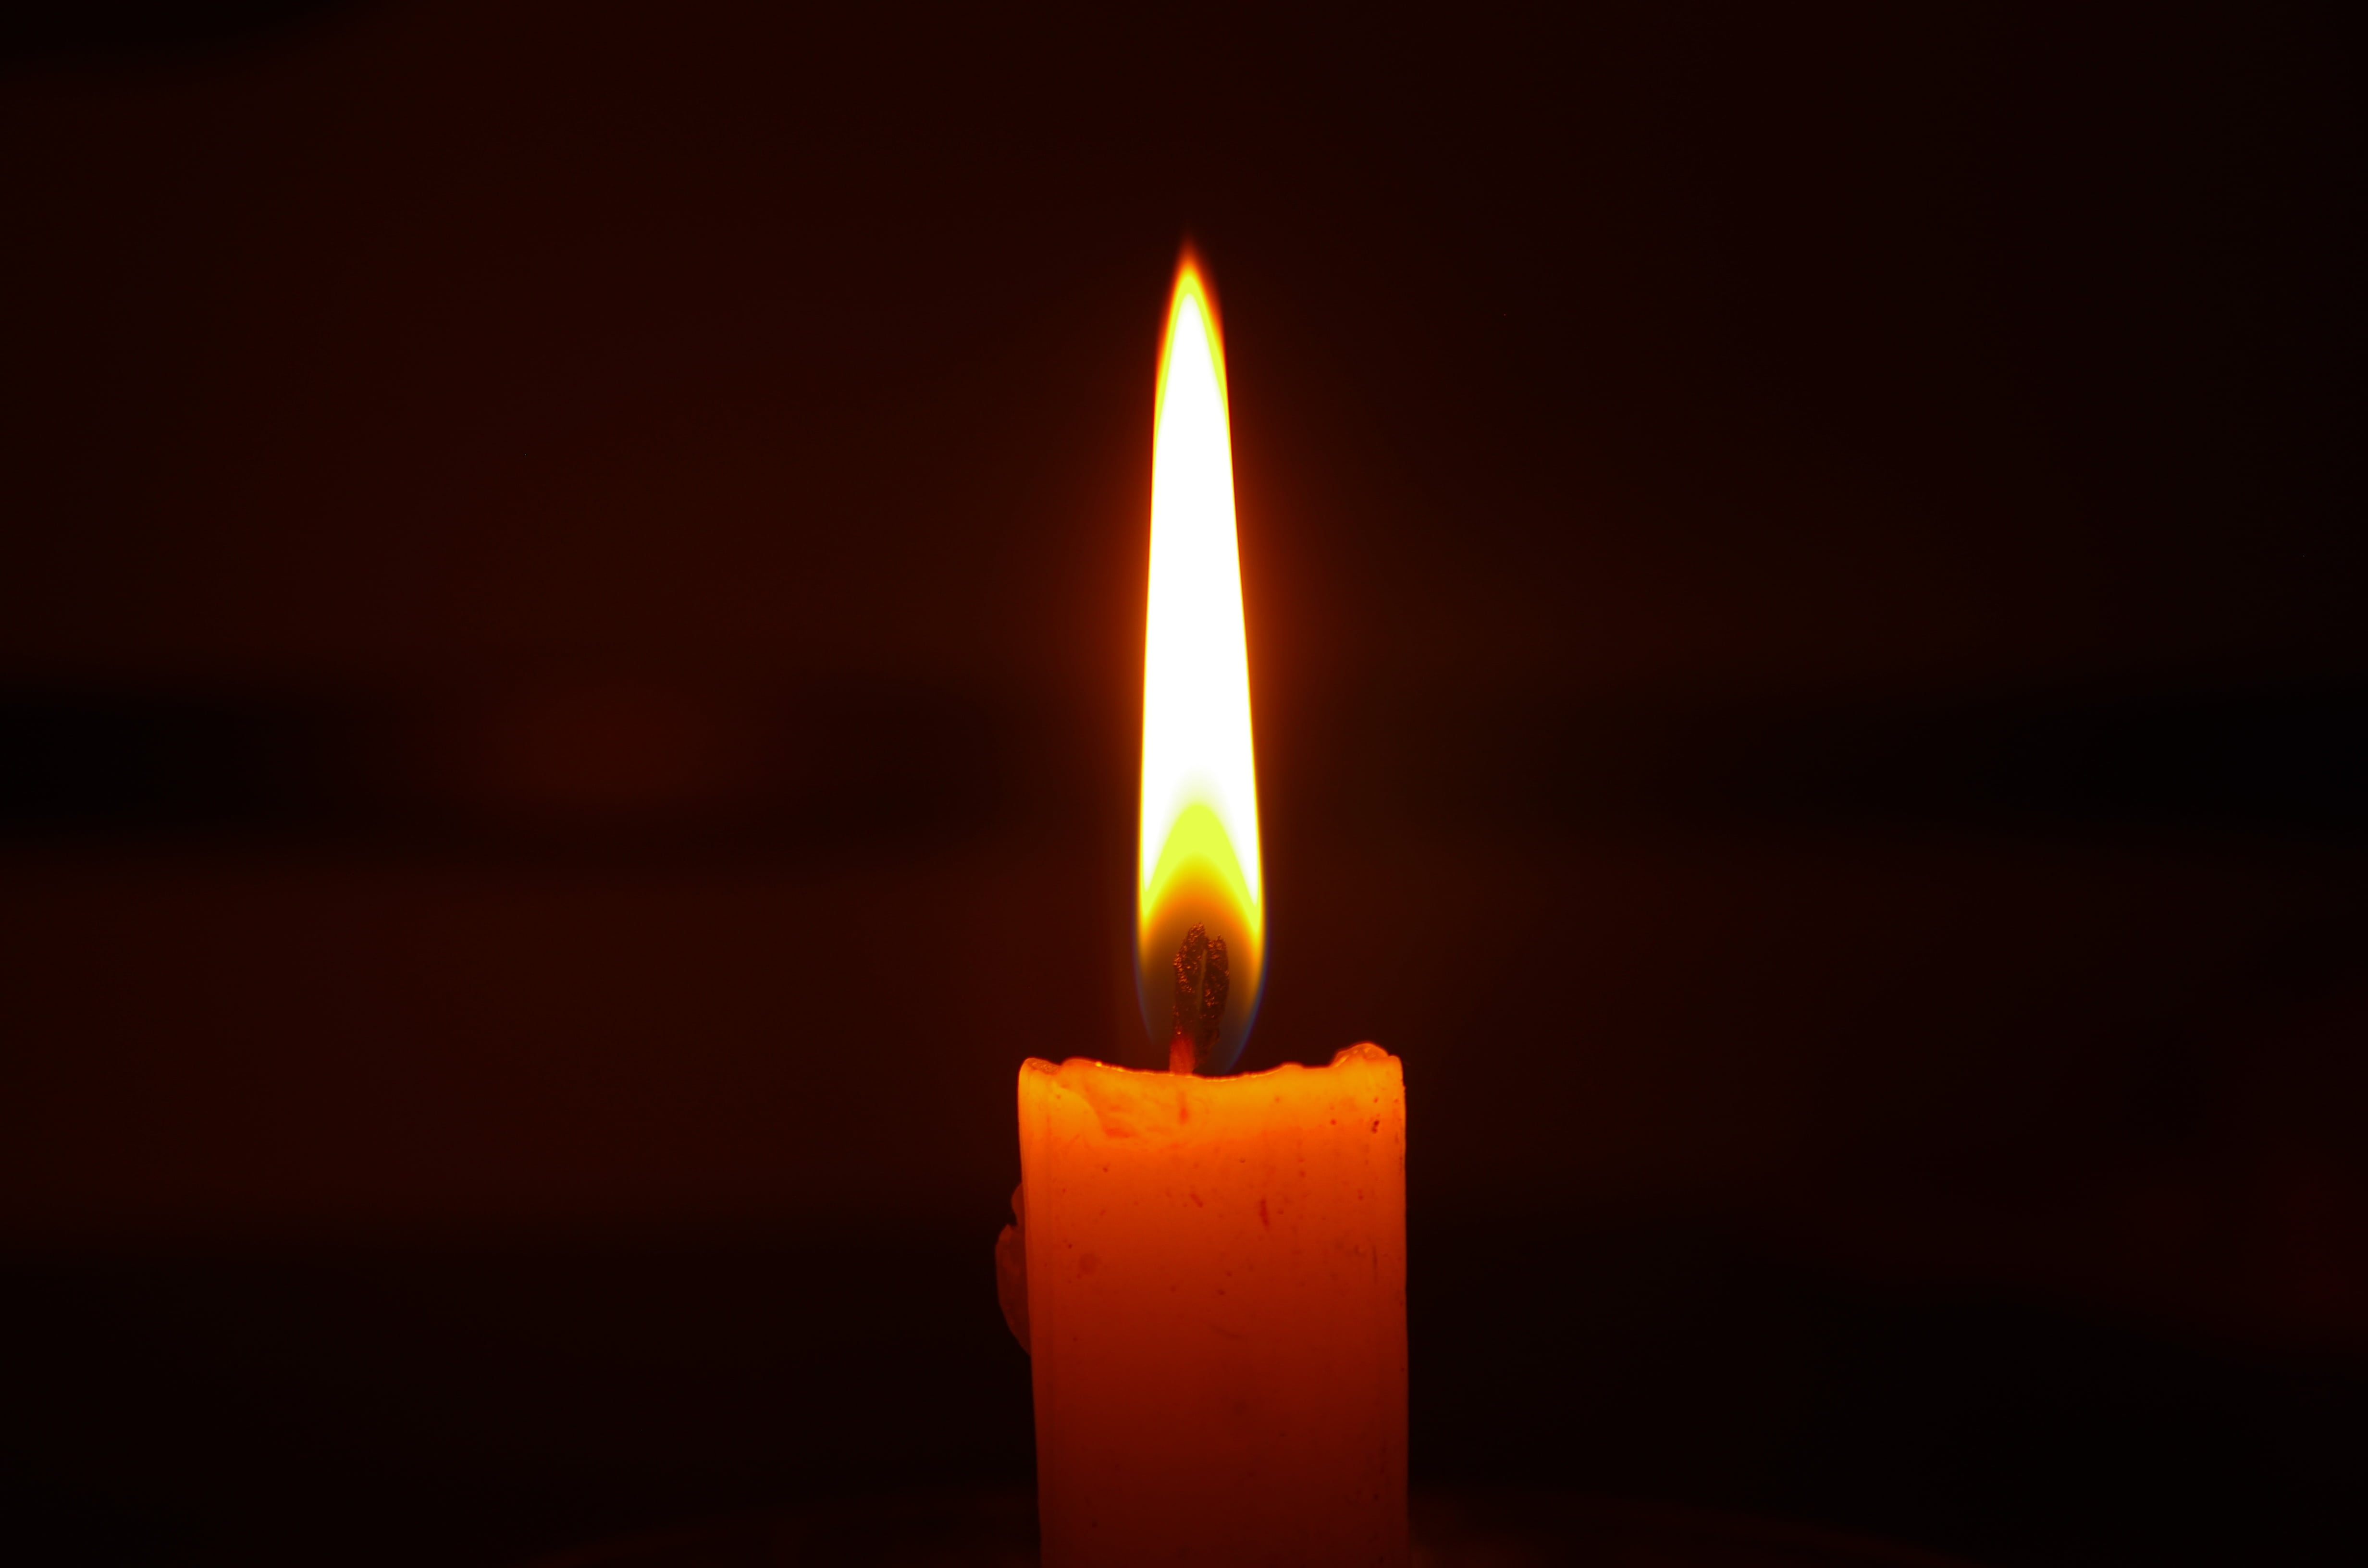 lighted candle, in the dark, ali, flame, fire - Natural Phenomenon